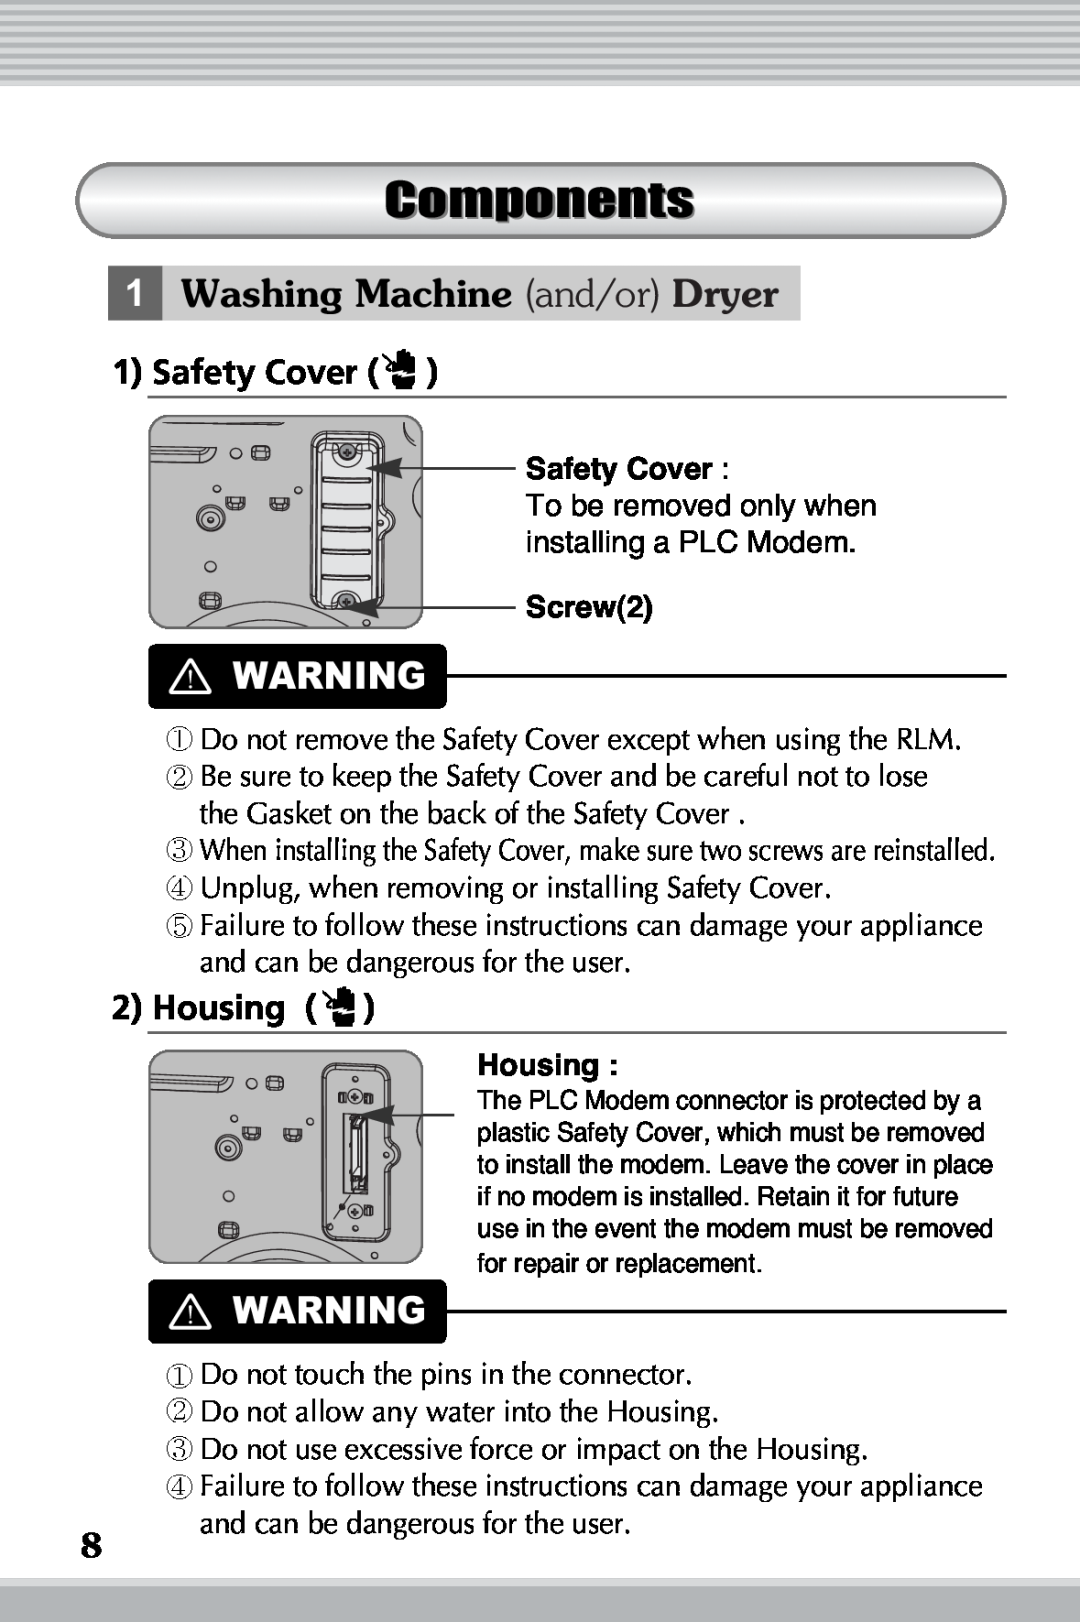 LG Electronics RLM20K, RLM10 owner manual Components, Washing Machine and/or Dryer, Safety Cover, Screw2, Housing 